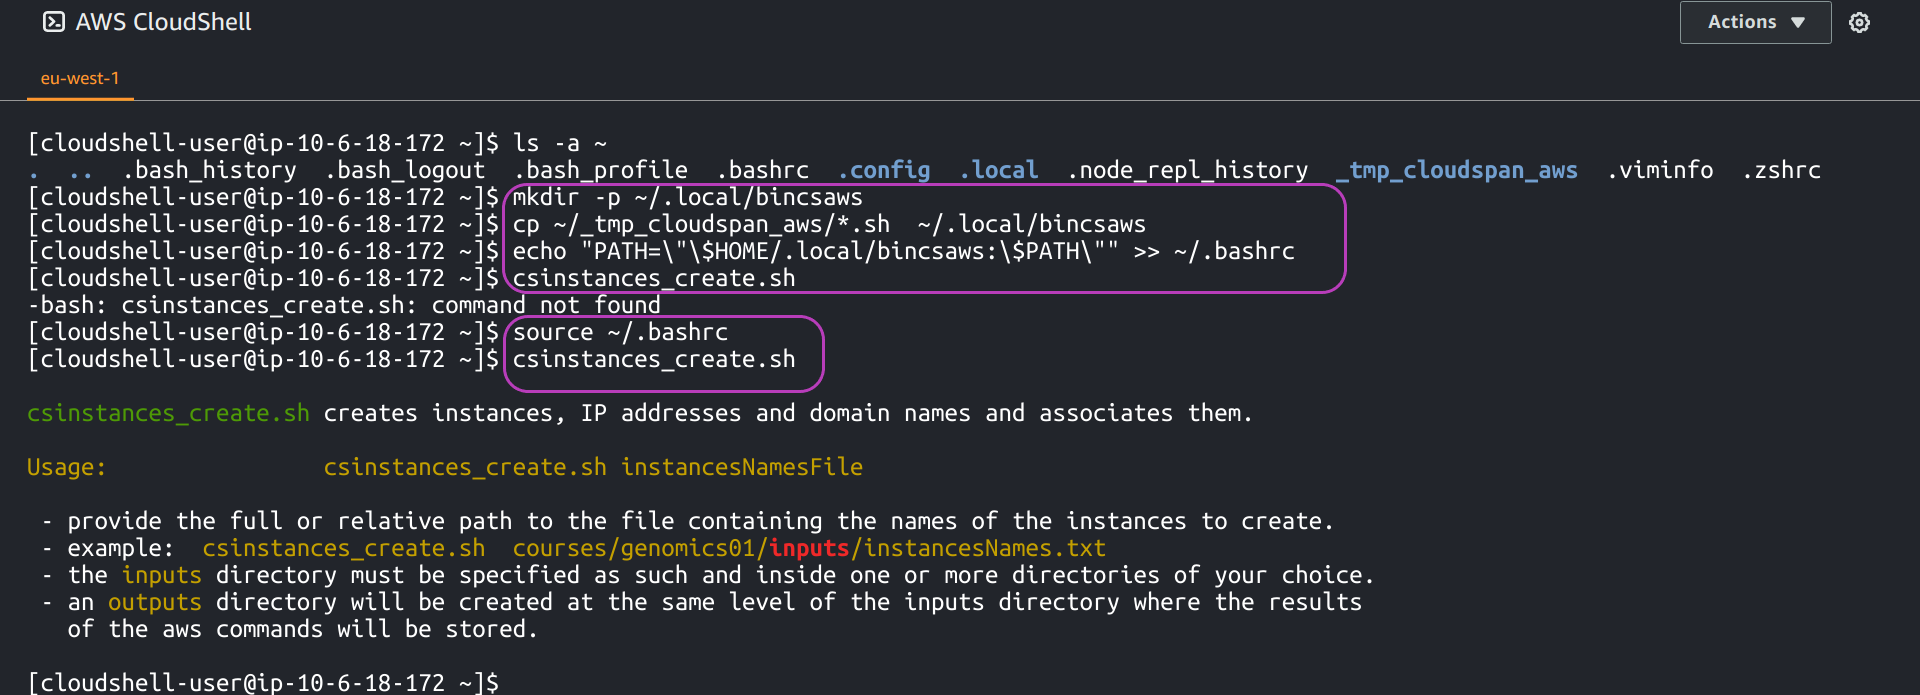 Screenshot of AWS Console page in a browser showing the AWS CloudShell terminal with command lines for installing and running one of the Scripts circled